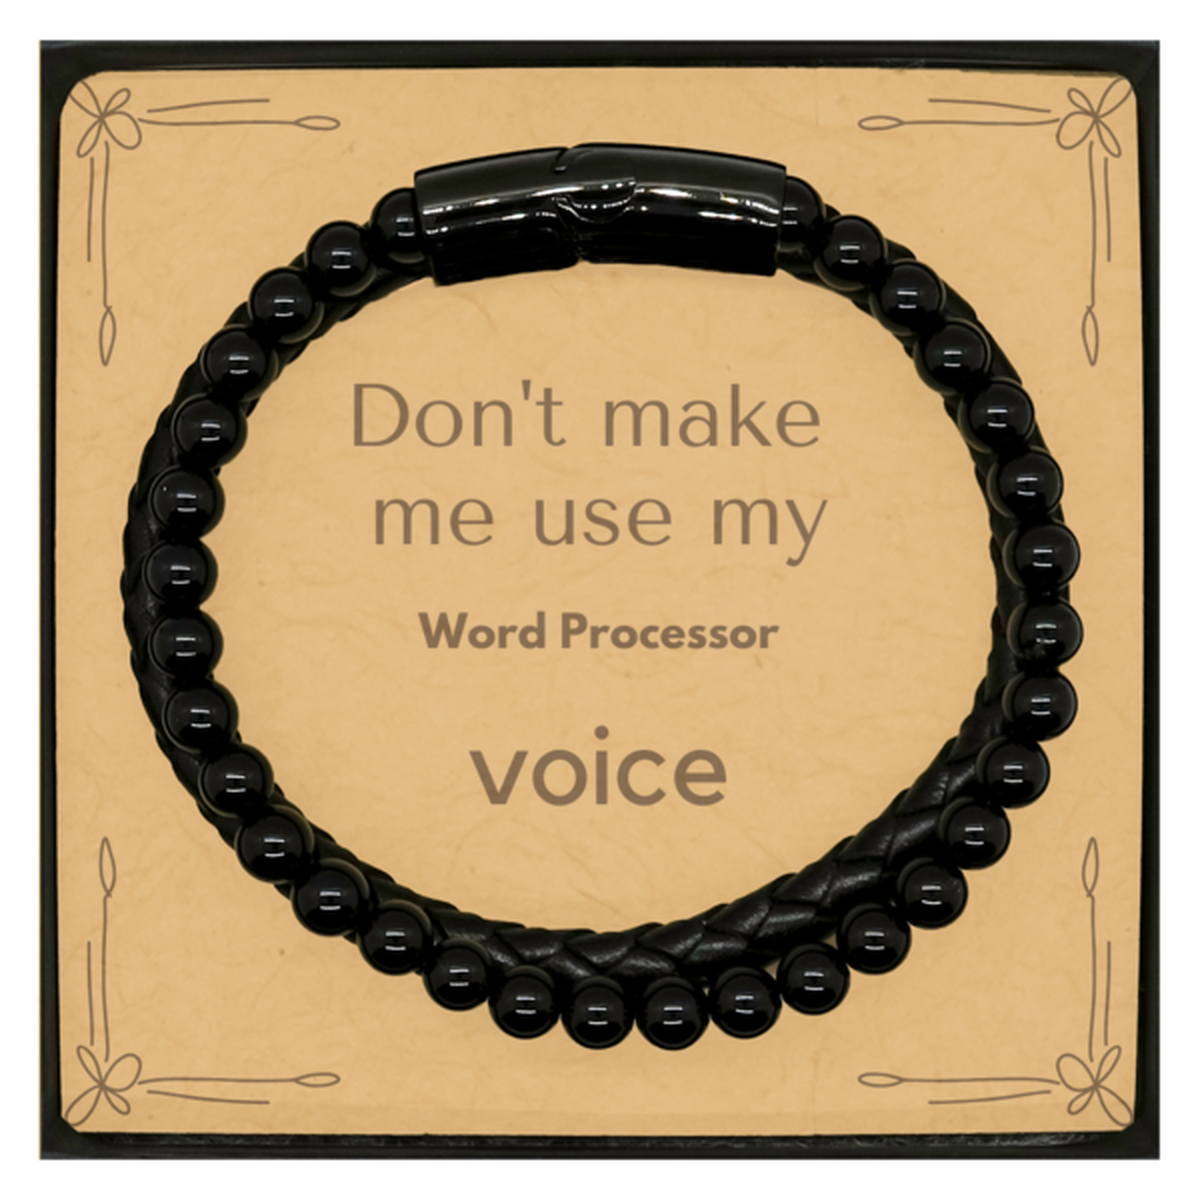 Don't make me use my Word Processor voice, Sarcasm Word Processor Card Gifts, Christmas Word Processor Stone Leather Bracelets Birthday Unique Gifts For Word Processor Coworkers, Men, Women, Colleague, Friends